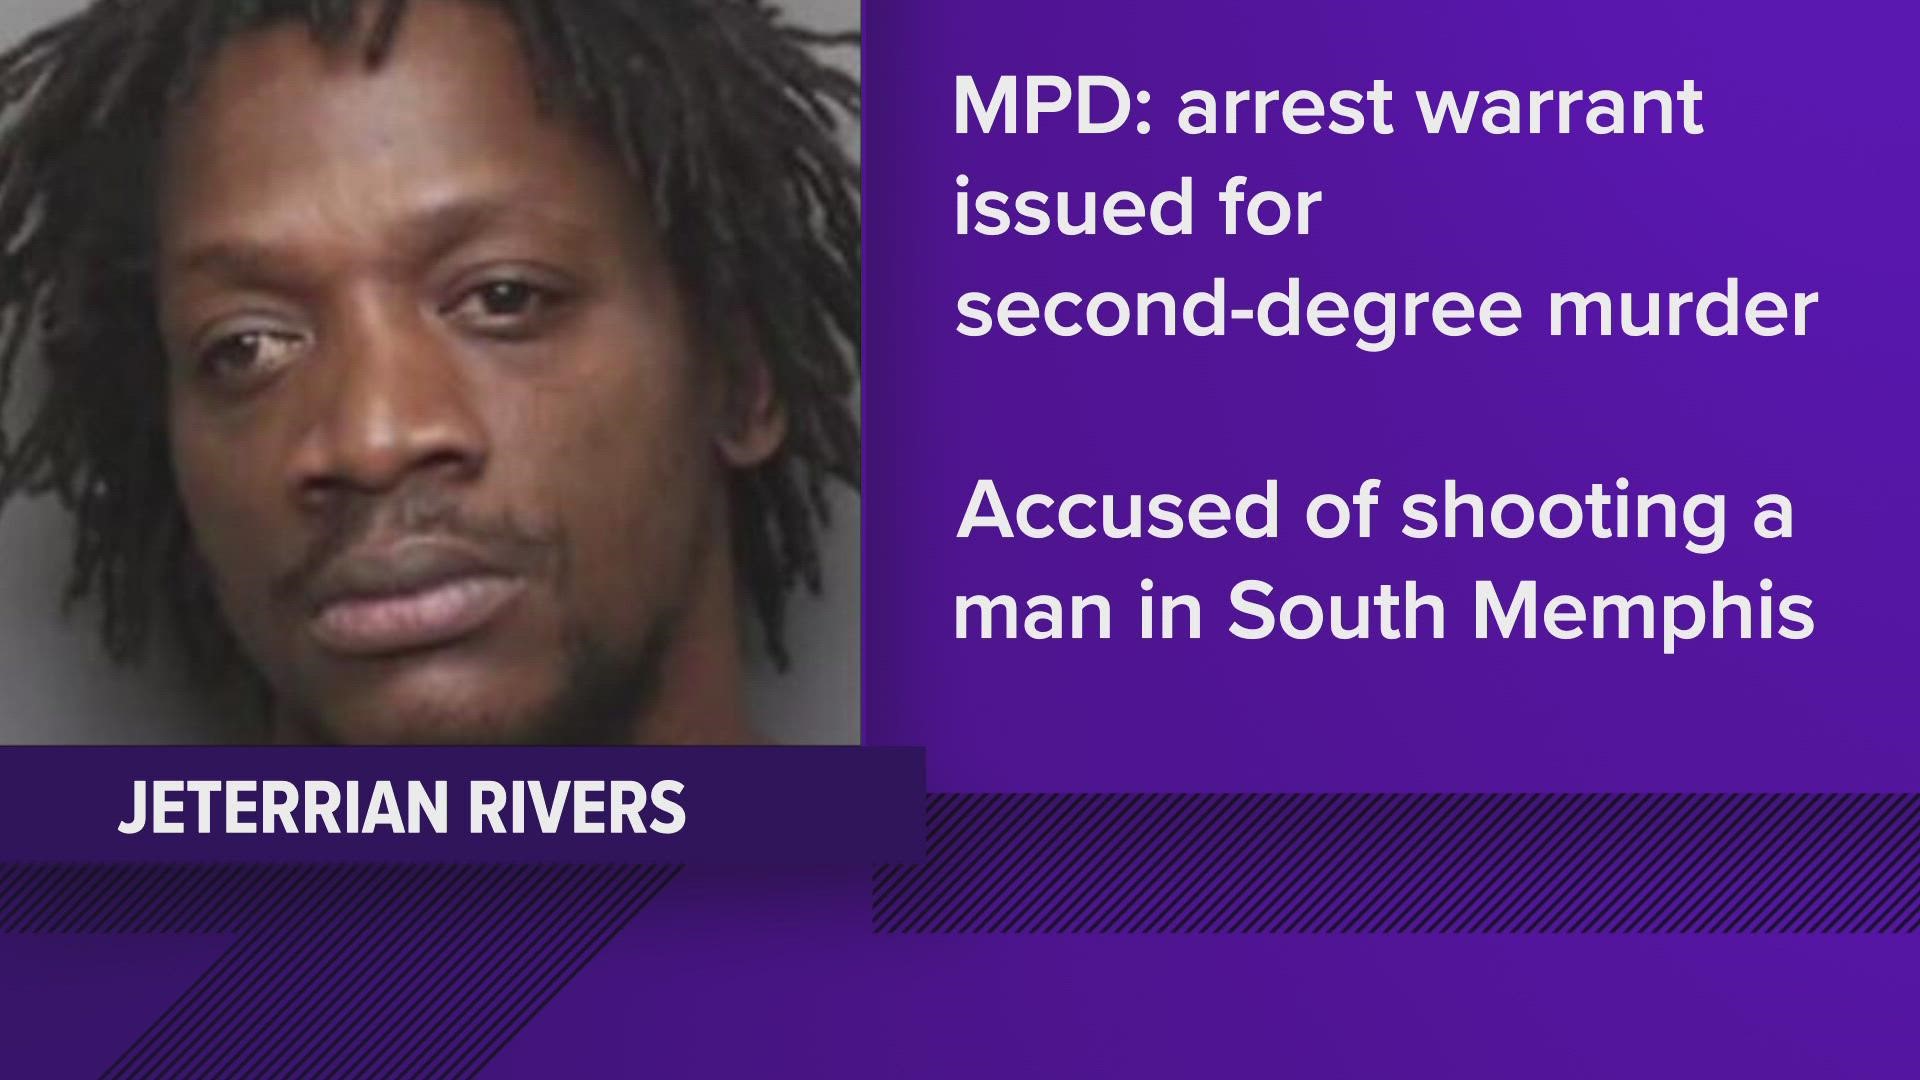 An arrest warrant for second degree murder has been issued for Jeterrian Rivers.